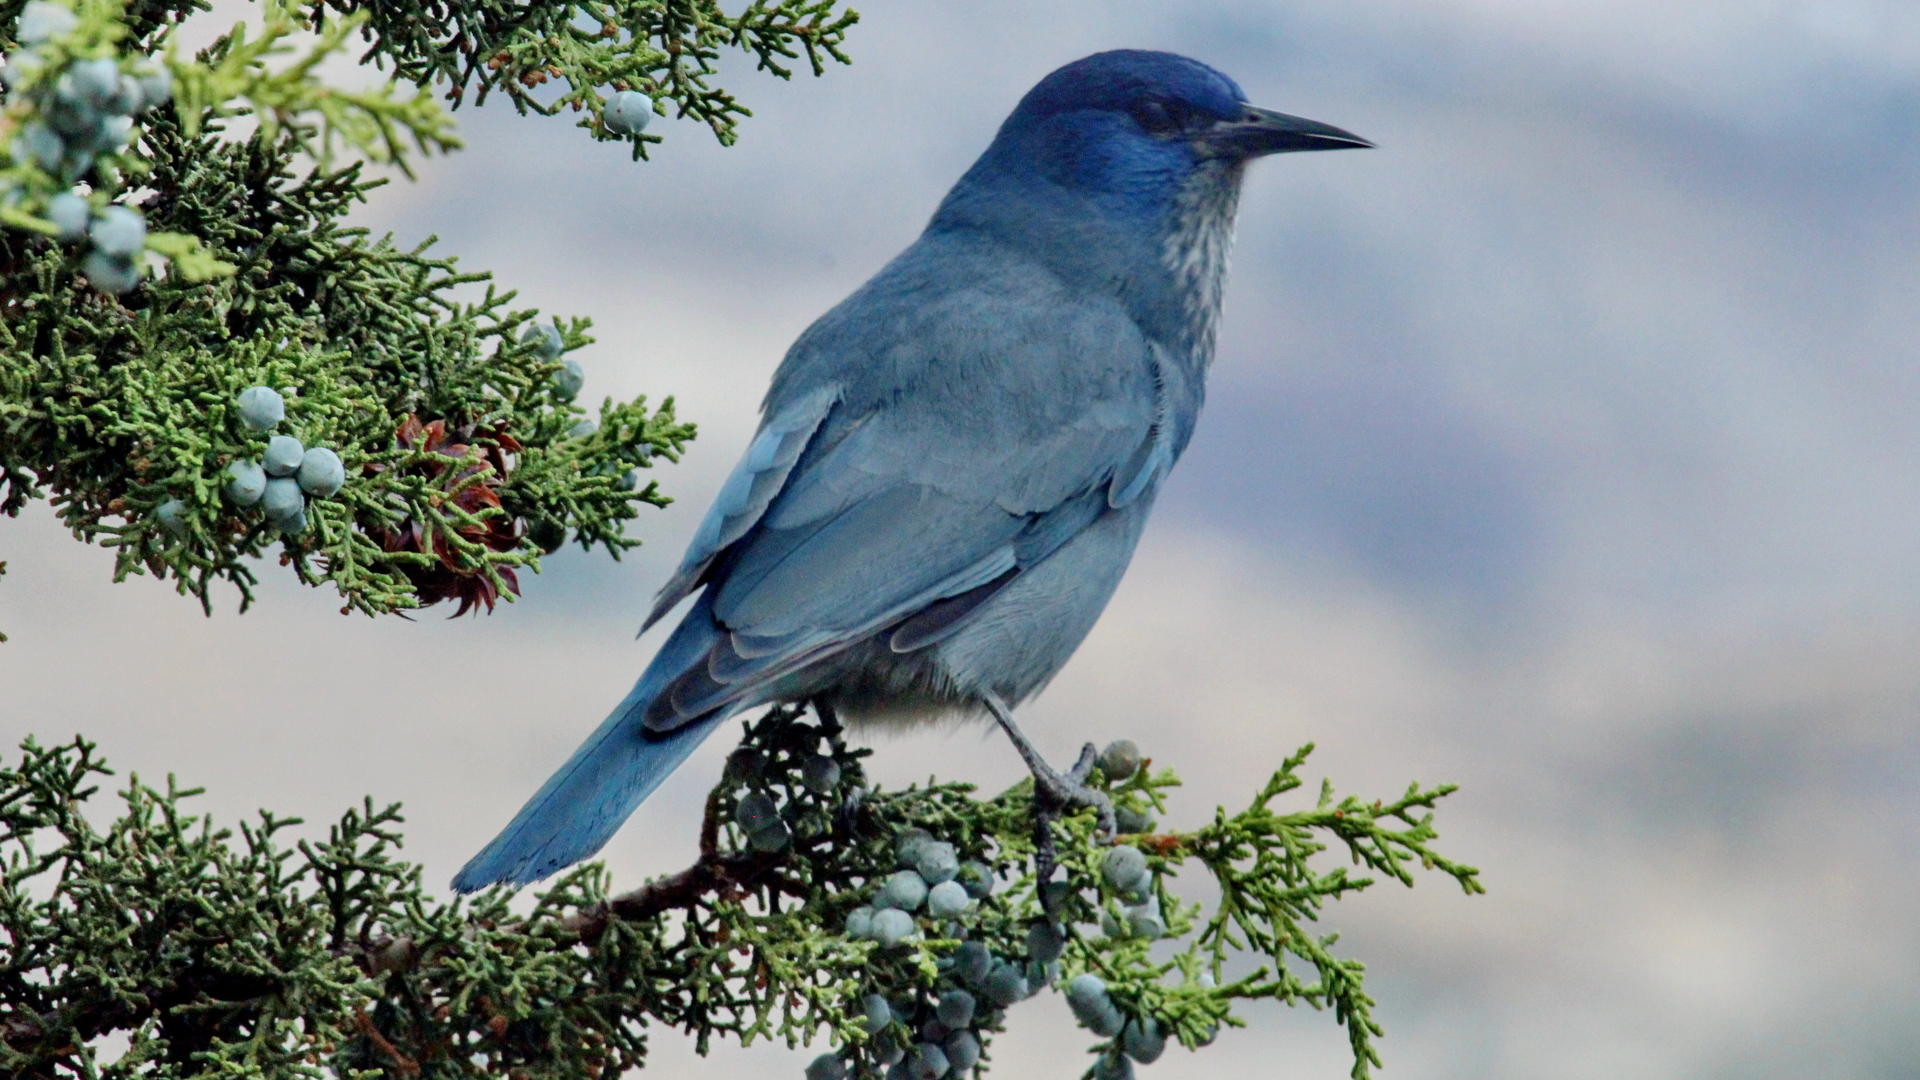 A pinyon jay sits in a juniper tree. The bird is a keystone species whose range extends across 13 Western states.